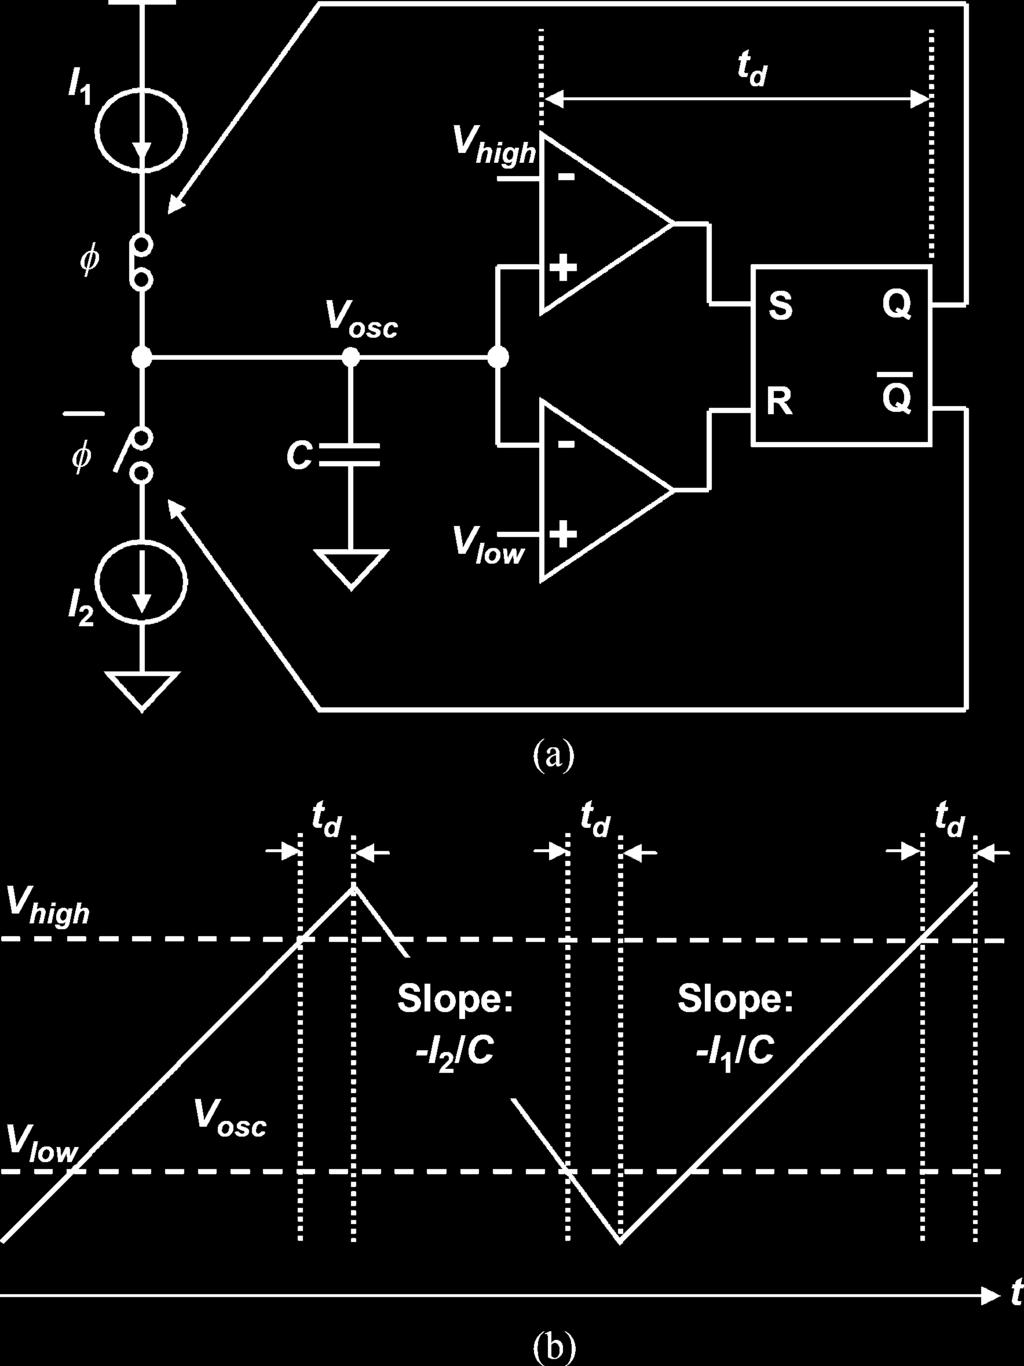 TOKUNAGA et al.: AN ON-CHIP CMOS RELAXATION OSCILLATOR WITH VOLTAGE AVERAGING FEEDBACK 1151 Fig. 3. Circuit schematics of (a) feedback amplifier and (b) comparator. Fig. 1. (a) Conventional RC-oscillator.